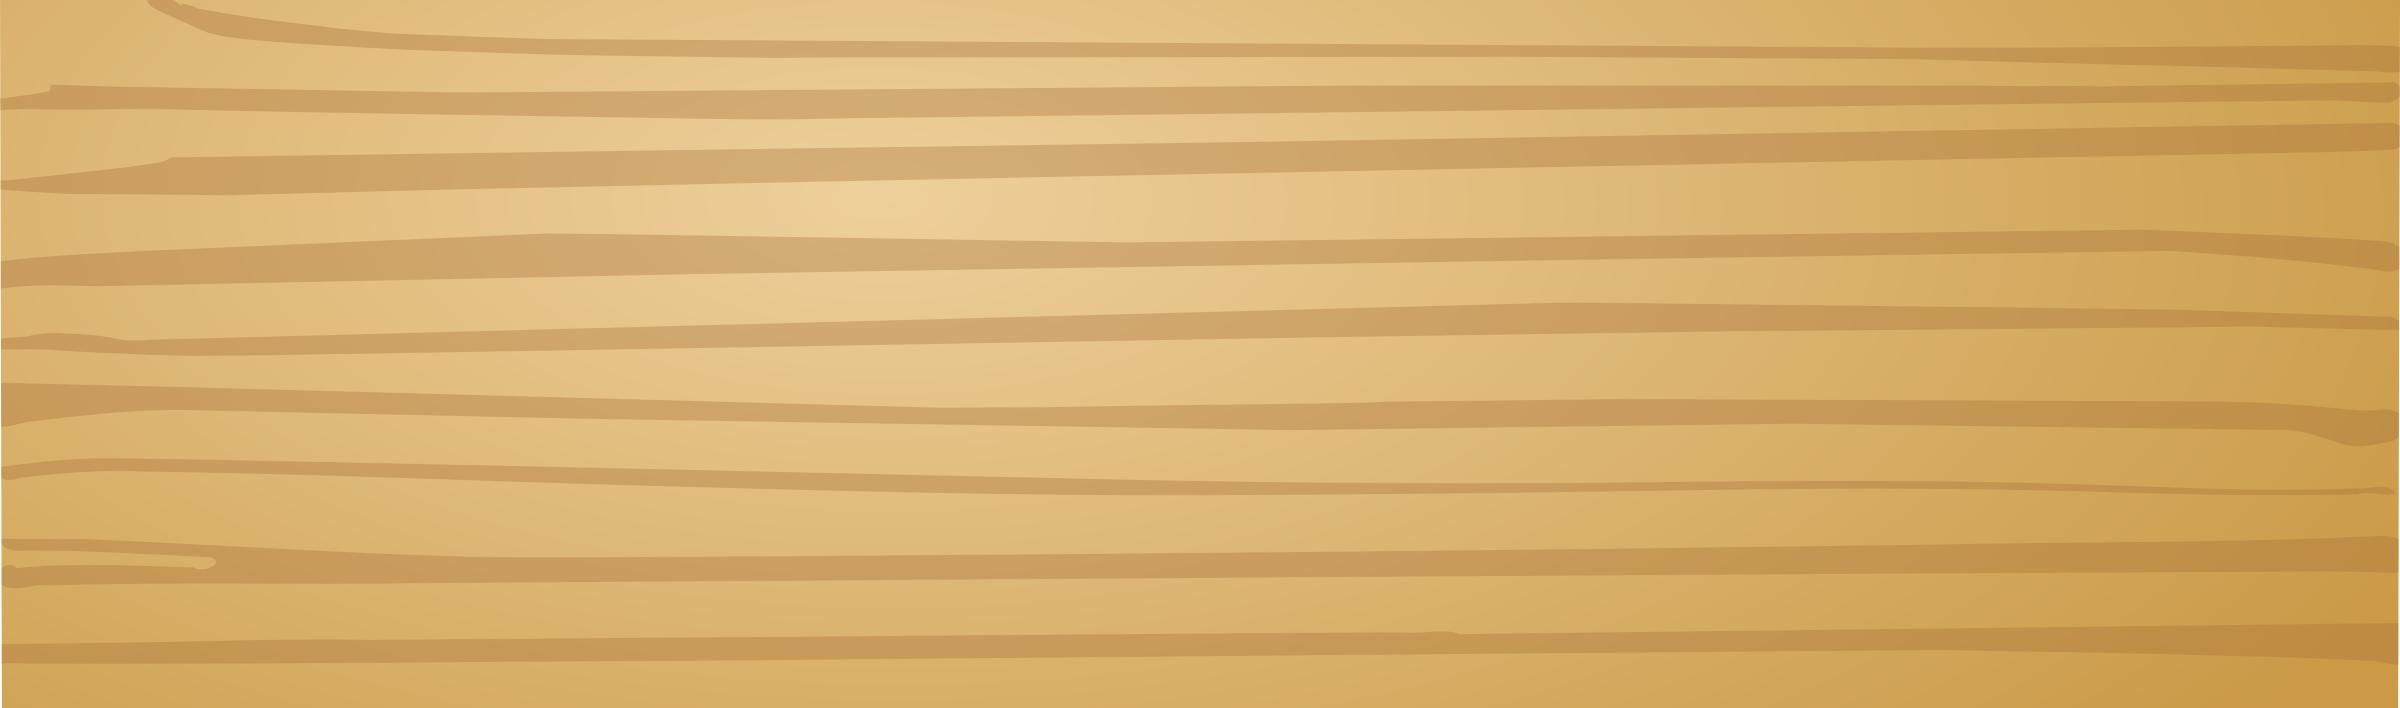 Wooden plank light png